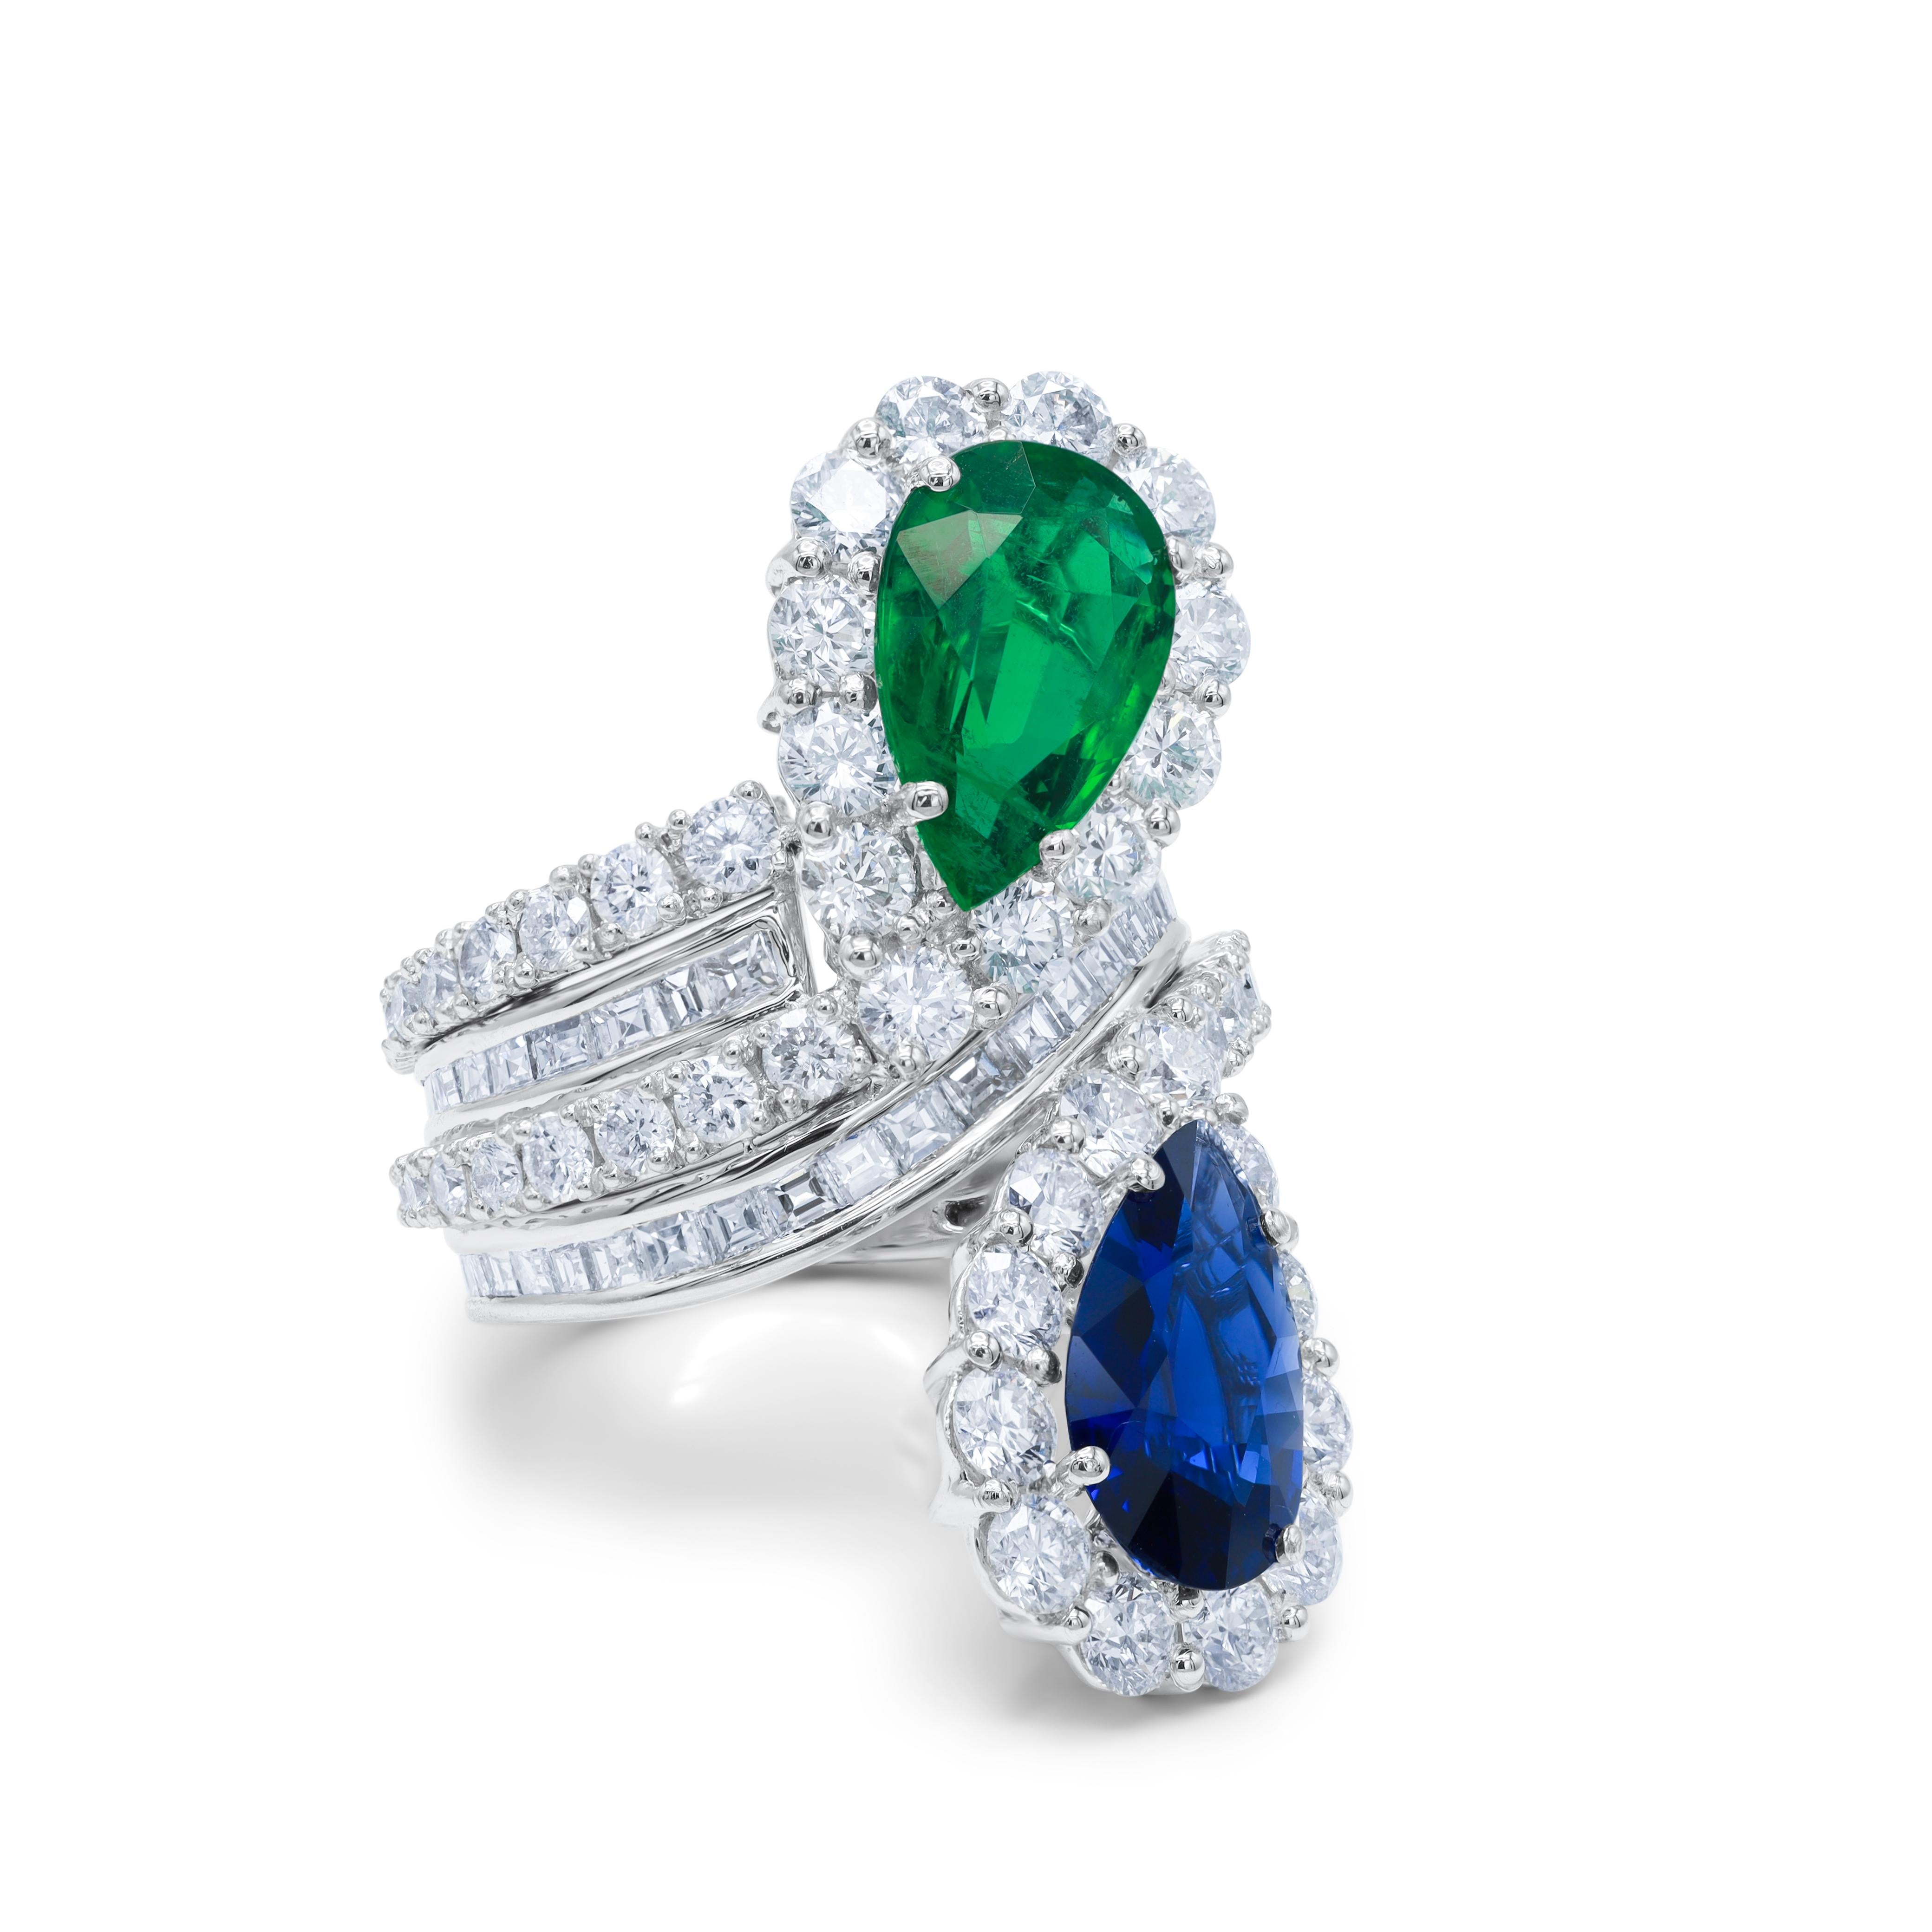 Platinum sapphire and emerald ring with a spiral design featuring a 2.98 ct pear shaped sapphire and 2.85 ct pear shaped emerald surrounded by 6.02 cts of diamonds (C.Dunaigre certified).
Diana M. is a leading supplier of top-quality fine jewelry